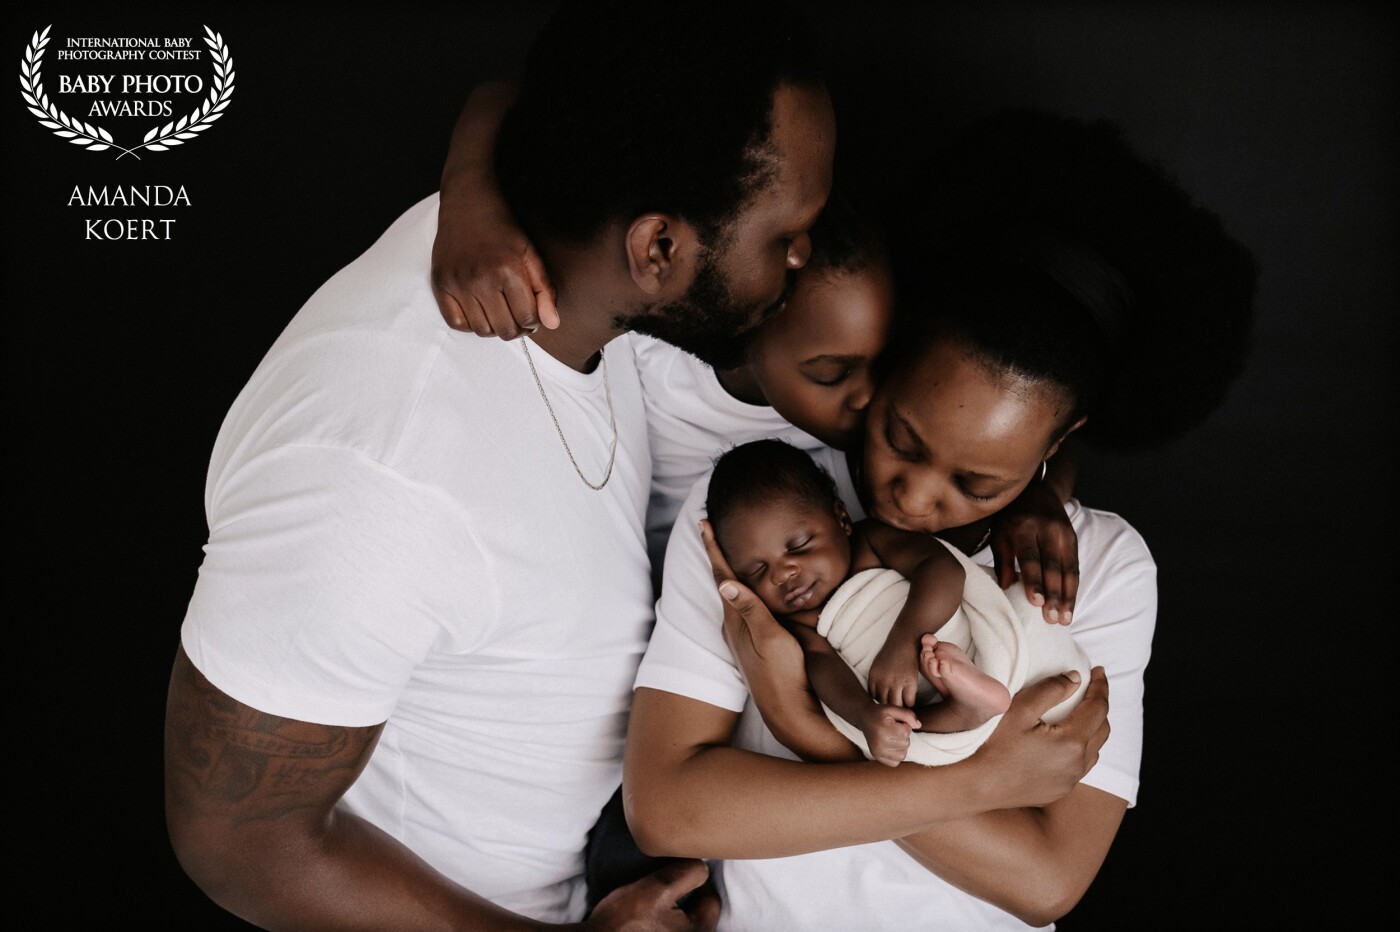 The baby arrived a few weeks early, two days before the birth we had done the pregnancy shoot with mom alone. We would do the photos with the father and daughter a few days later, on that day little Gabriel was born. My responsibility to take beautiful family photos now!